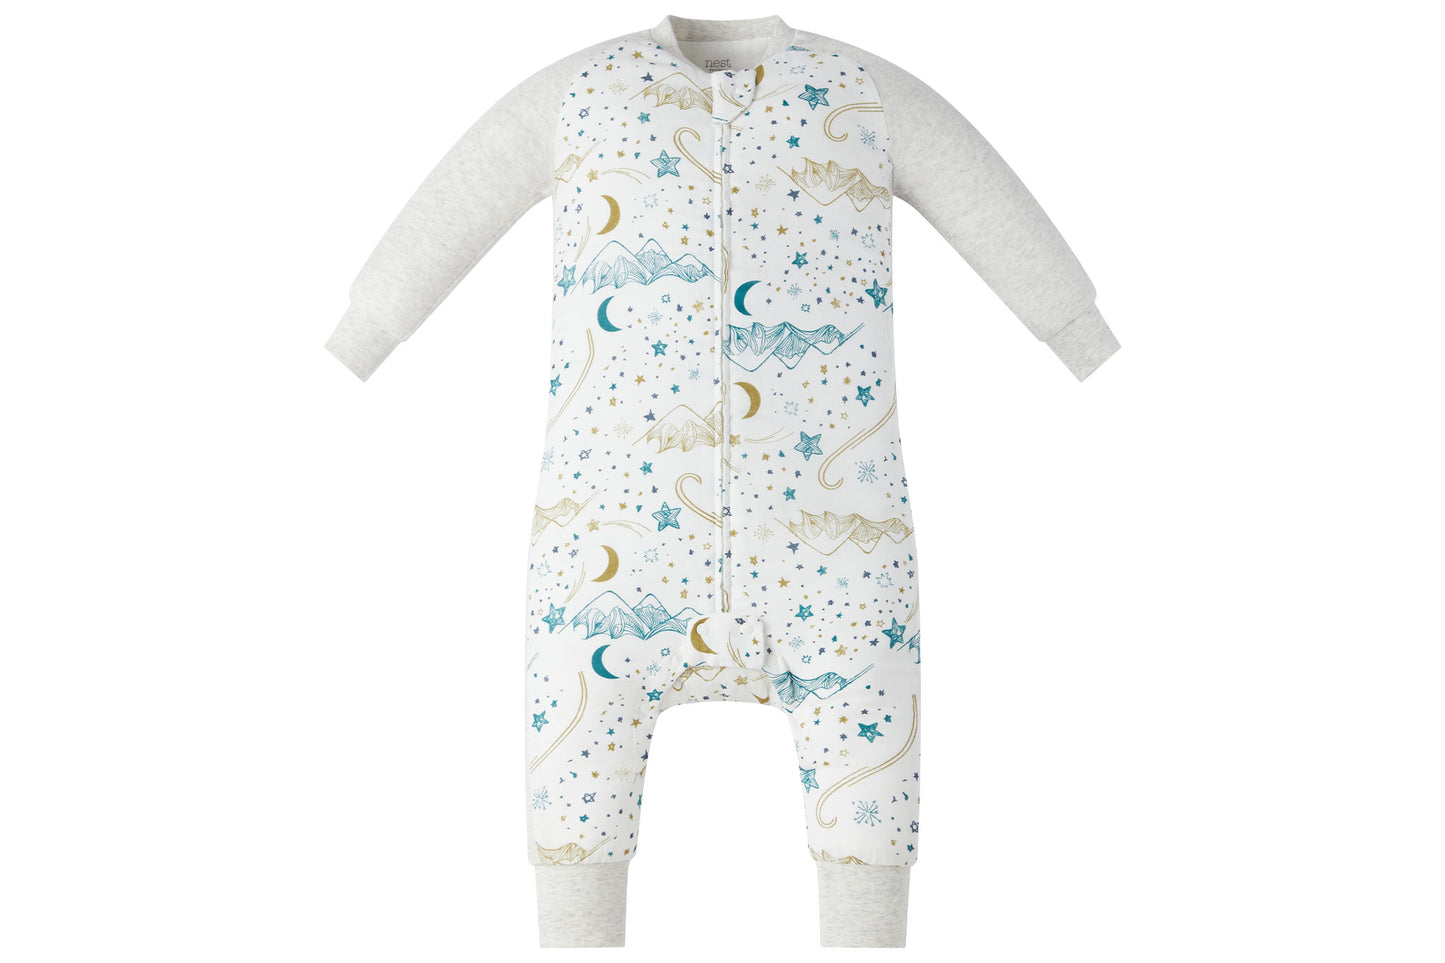 Cotton Central™ Premium Long Sleeves Sleeper Pure Cotton Body Frog Suit  Newborn Infant Baby Stuff